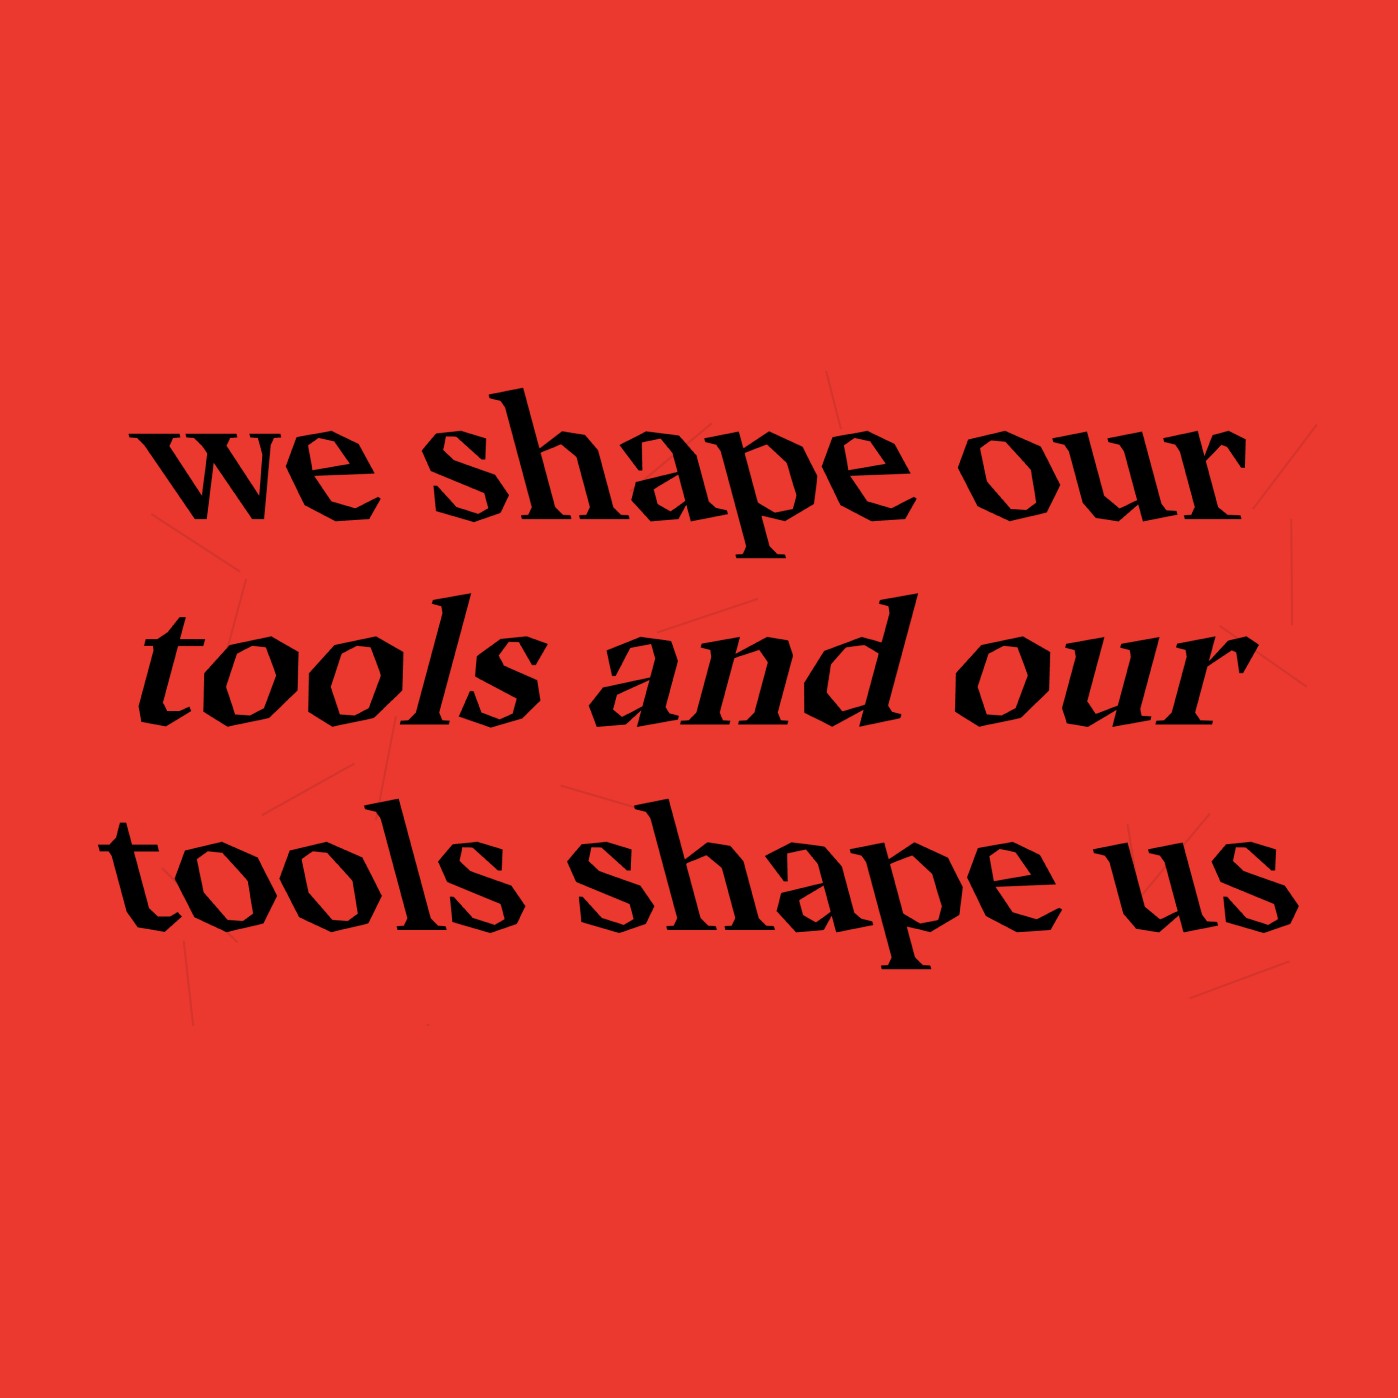 our tools shape us